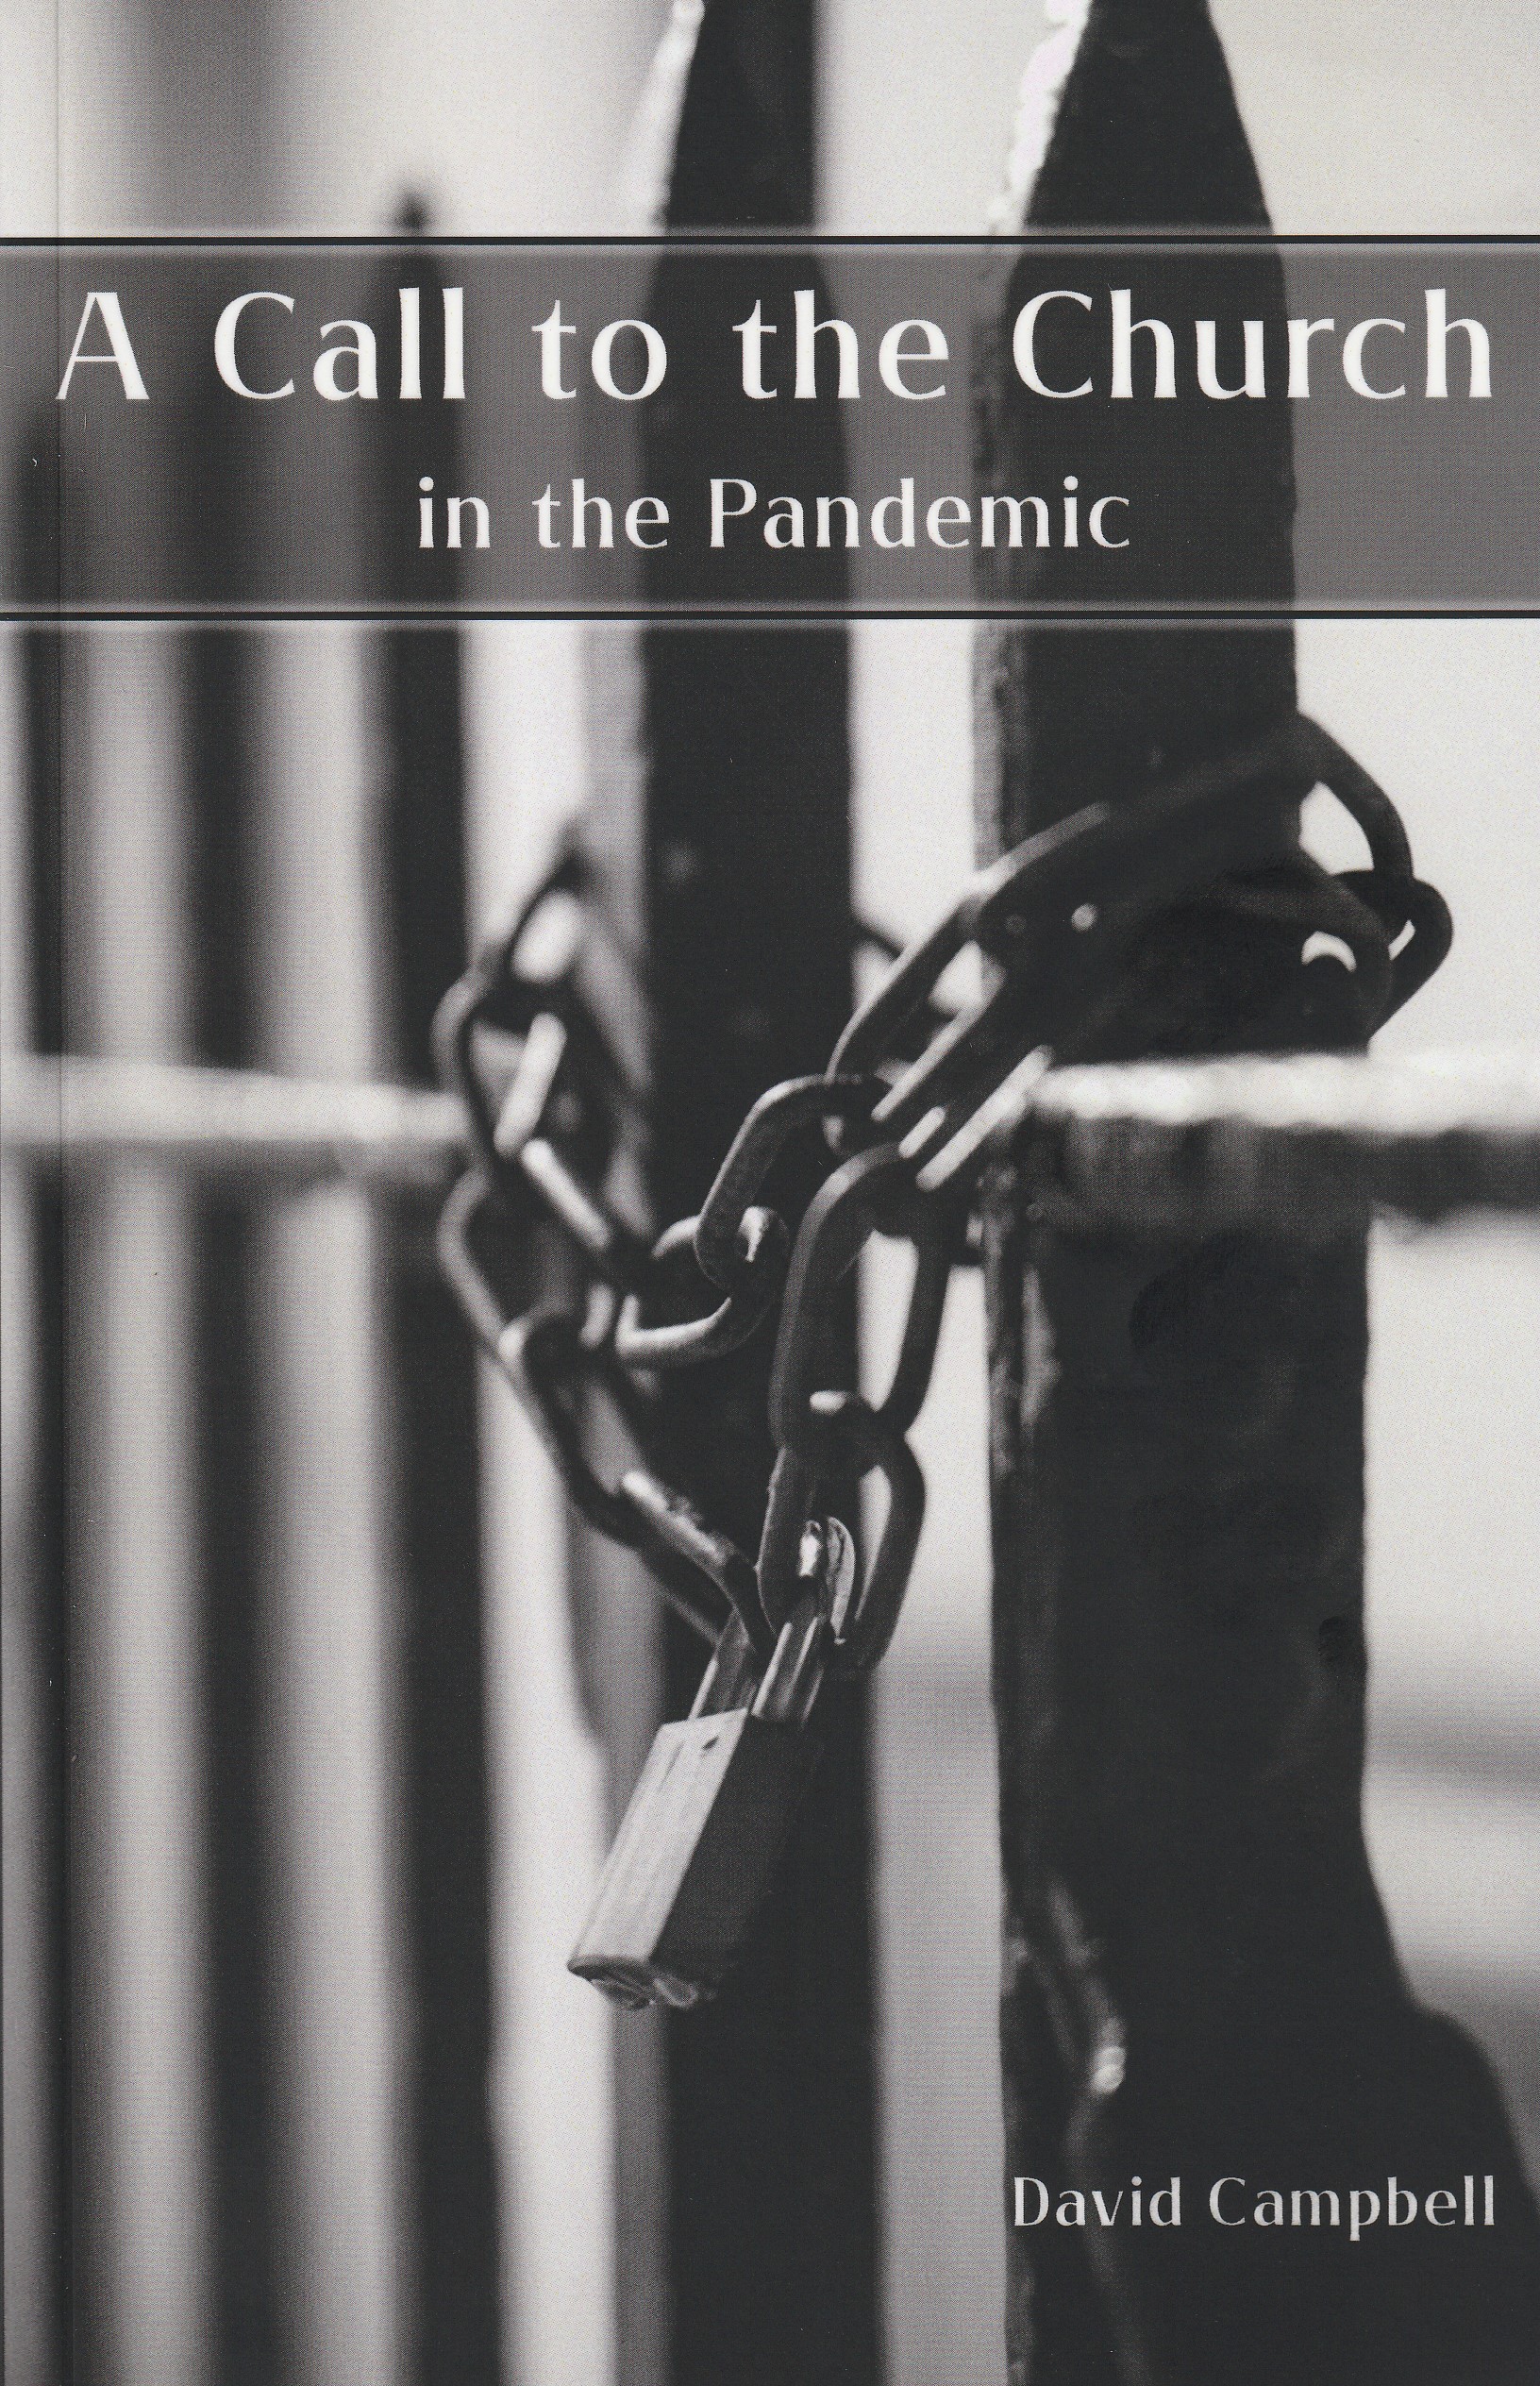 A Call to the Church in the Pandemic